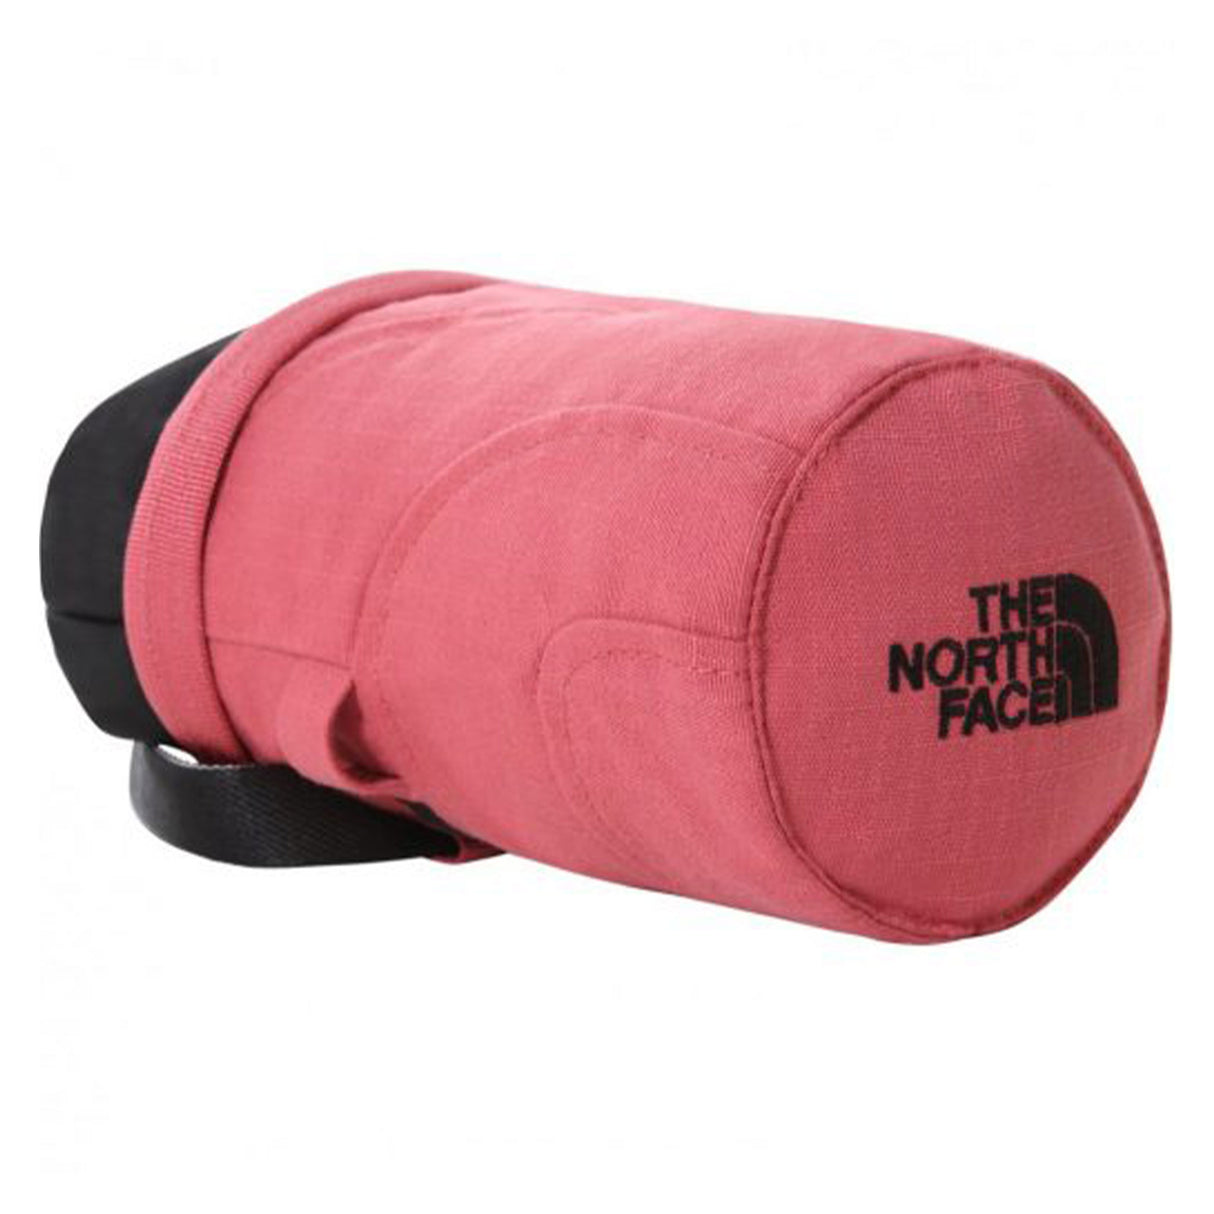 The North Face T2 Chalk Bag City